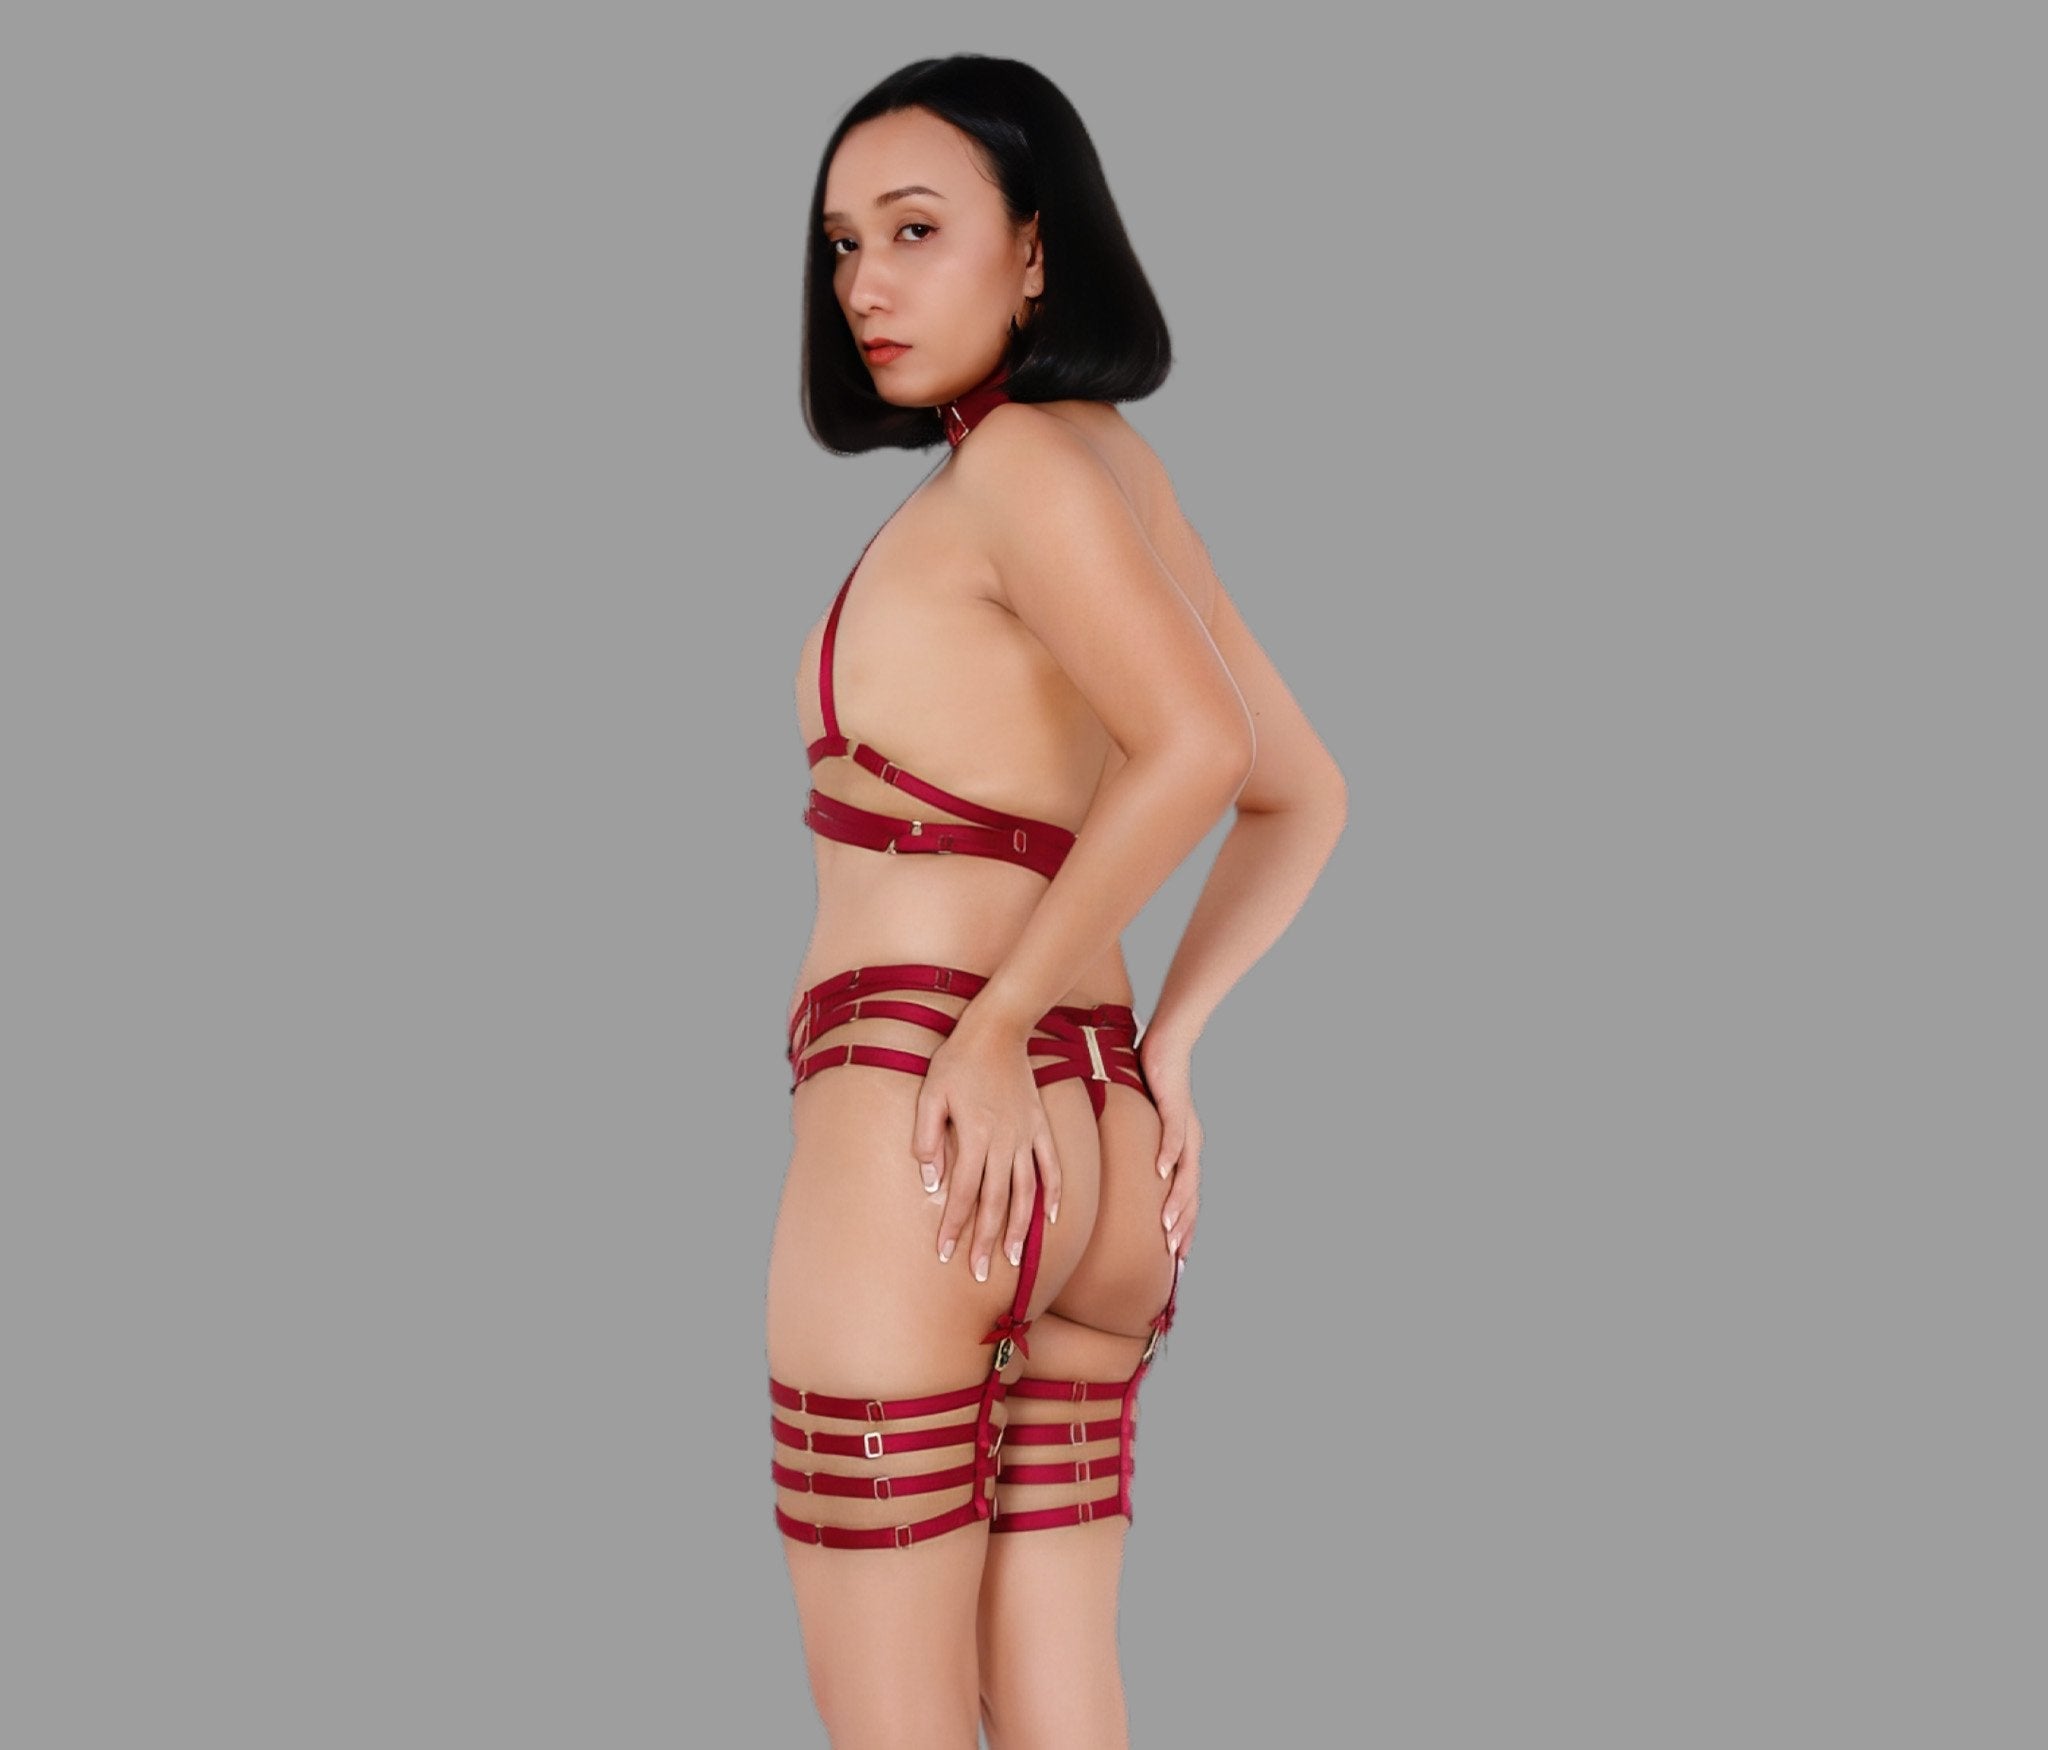 Sexy strappy body harness set in burgundy red with choker harness bra garter and suspender boudoir gift for her - Ange Déchu